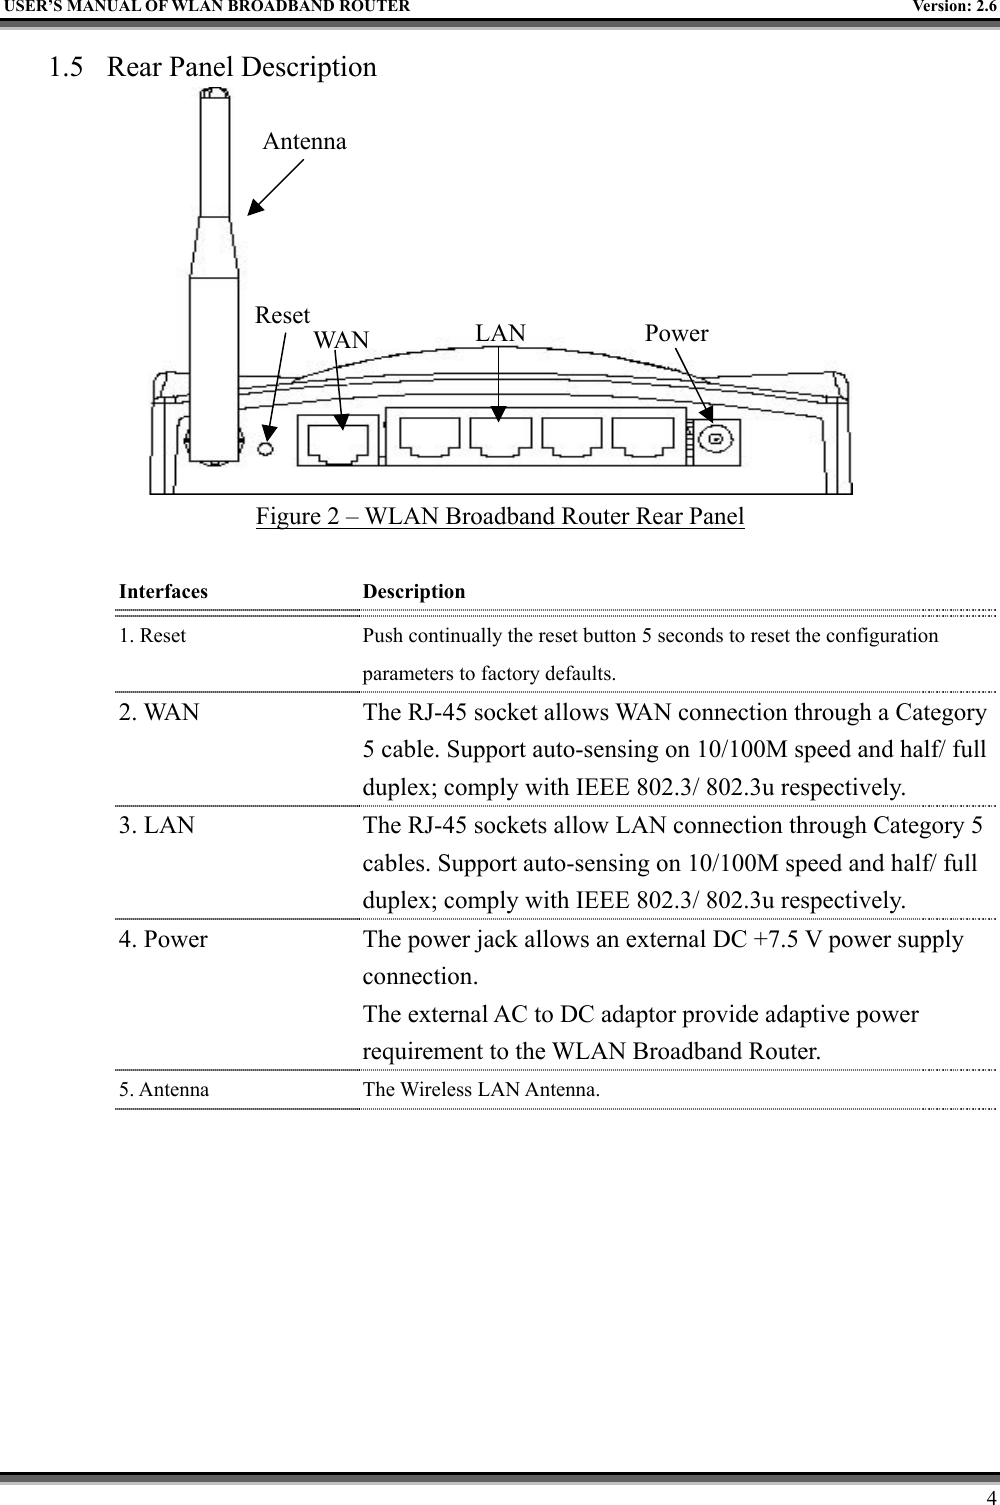   USER’S MANUAL OF WLAN BROADBAND ROUTER    Version: 2.6     4 1.5  Rear Panel Description  Figure 2 – WLAN Broadband Router Rear Panel  Interfaces  Description 1. Reset    Push continually the reset button 5 seconds to reset the configuration parameters to factory defaults. 2. WAN   The RJ-45 socket allows WAN connection through a Category 5 cable. Support auto-sensing on 10/100M speed and half/ full duplex; comply with IEEE 802.3/ 802.3u respectively. 3. LAN   The RJ-45 sockets allow LAN connection through Category 5 cables. Support auto-sensing on 10/100M speed and half/ full duplex; comply with IEEE 802.3/ 802.3u respectively. 4. Power   The power jack allows an external DC +7.5 V power supply connection.  The external AC to DC adaptor provide adaptive power requirement to the WLAN Broadband Router. 5. Antenna    The Wireless LAN Antenna. WAN  LAN PowerAntenna Reset 